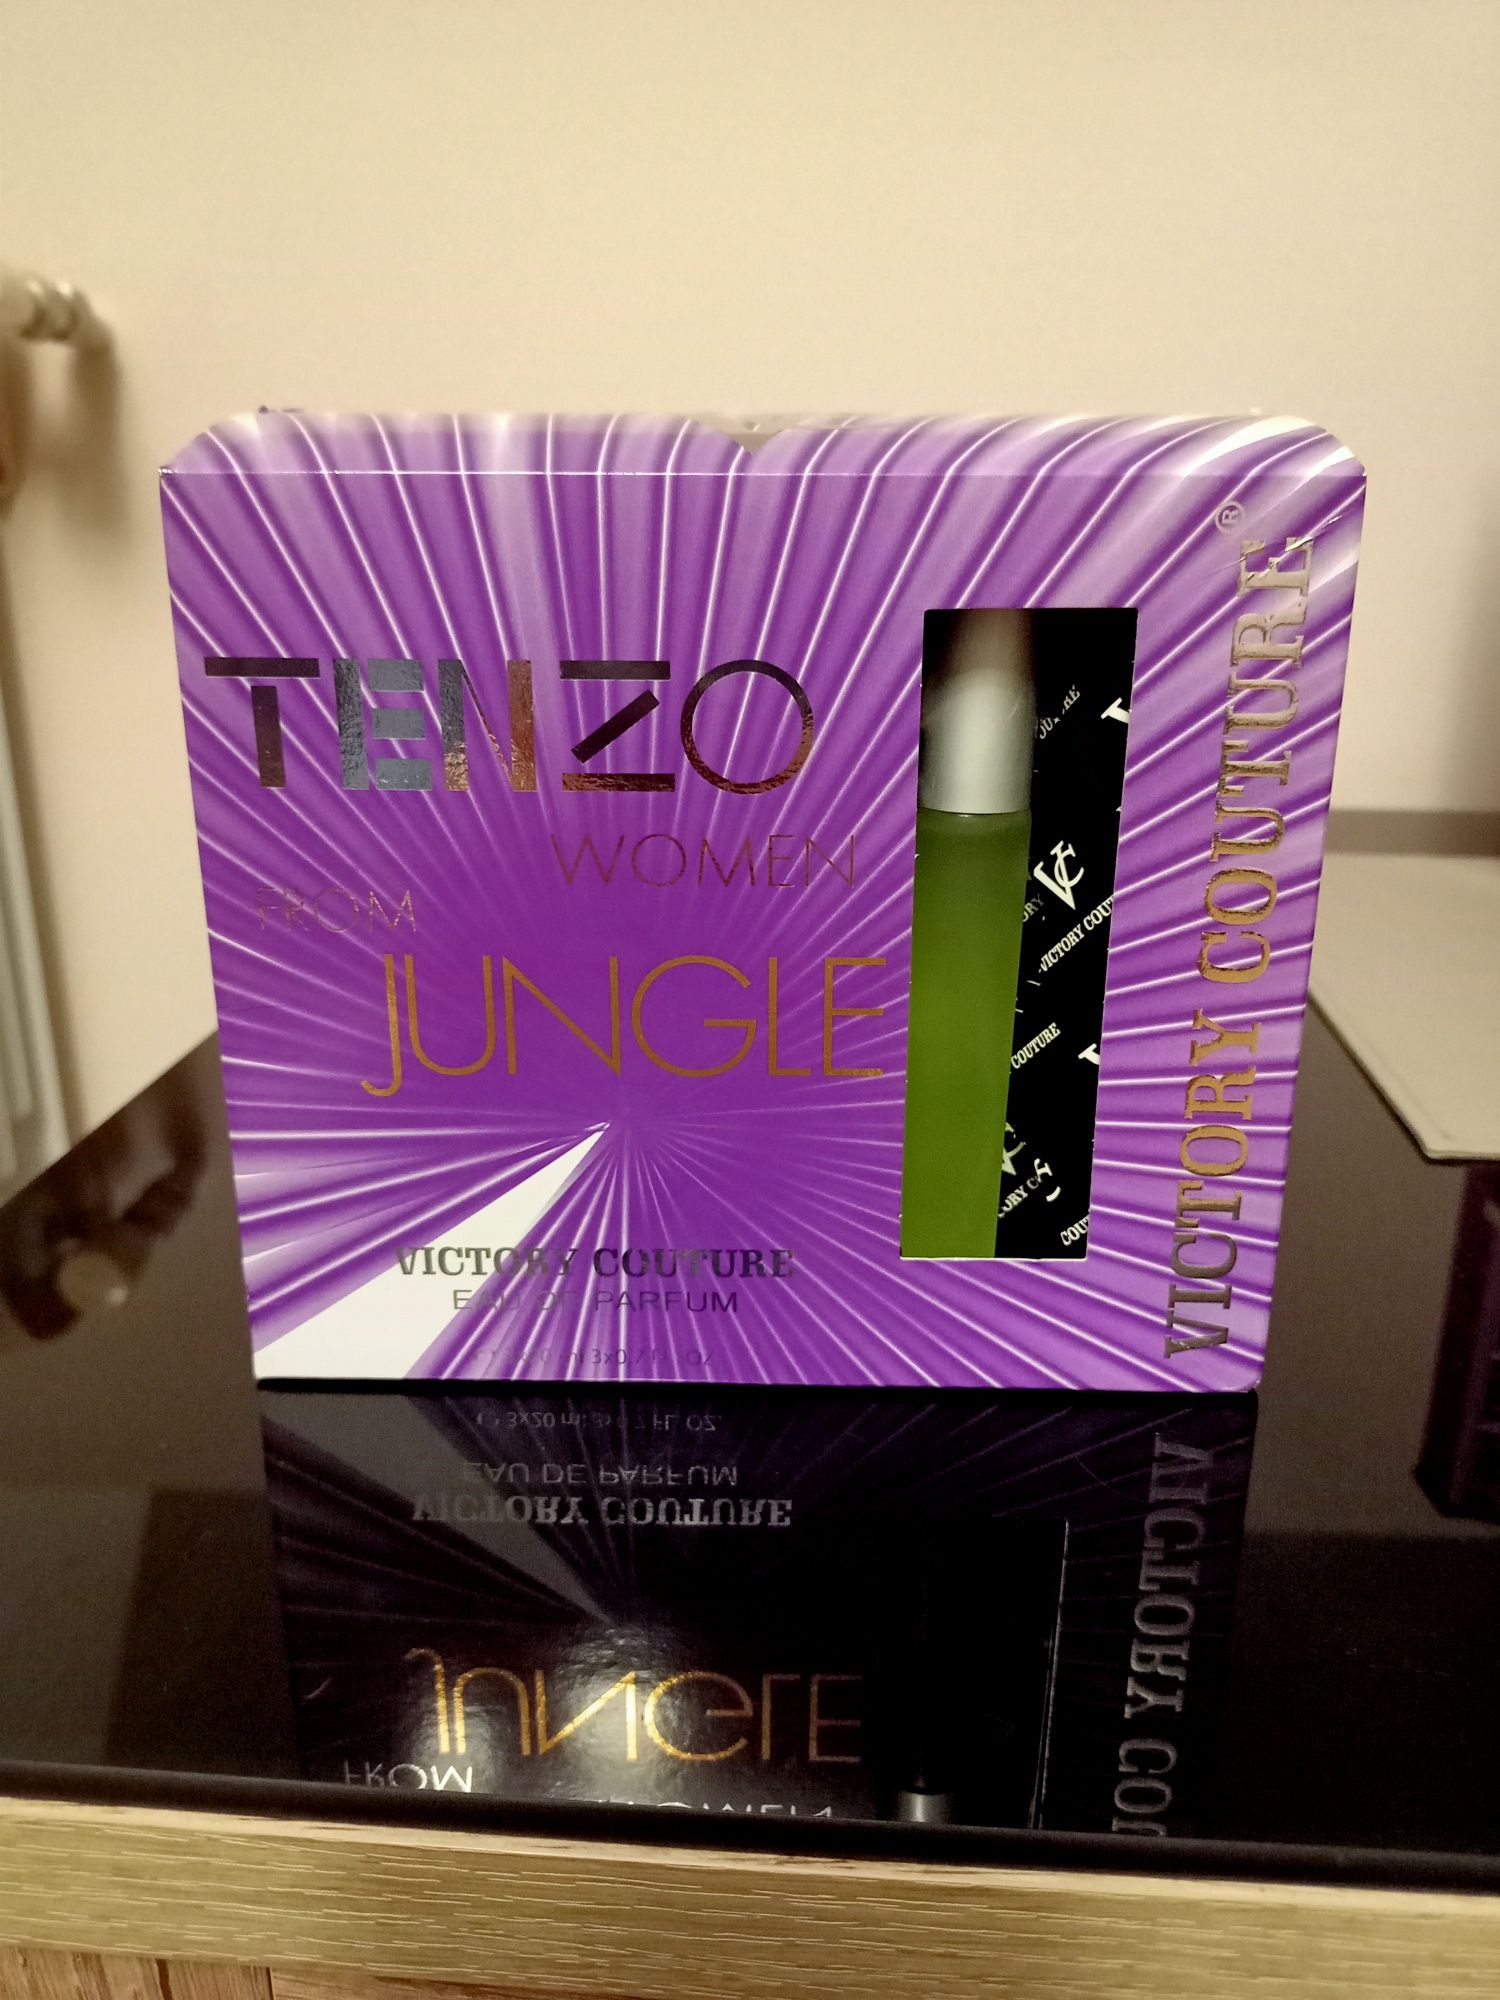 Victory Couture Tenzo Women from Jungle  3 x 20 ml